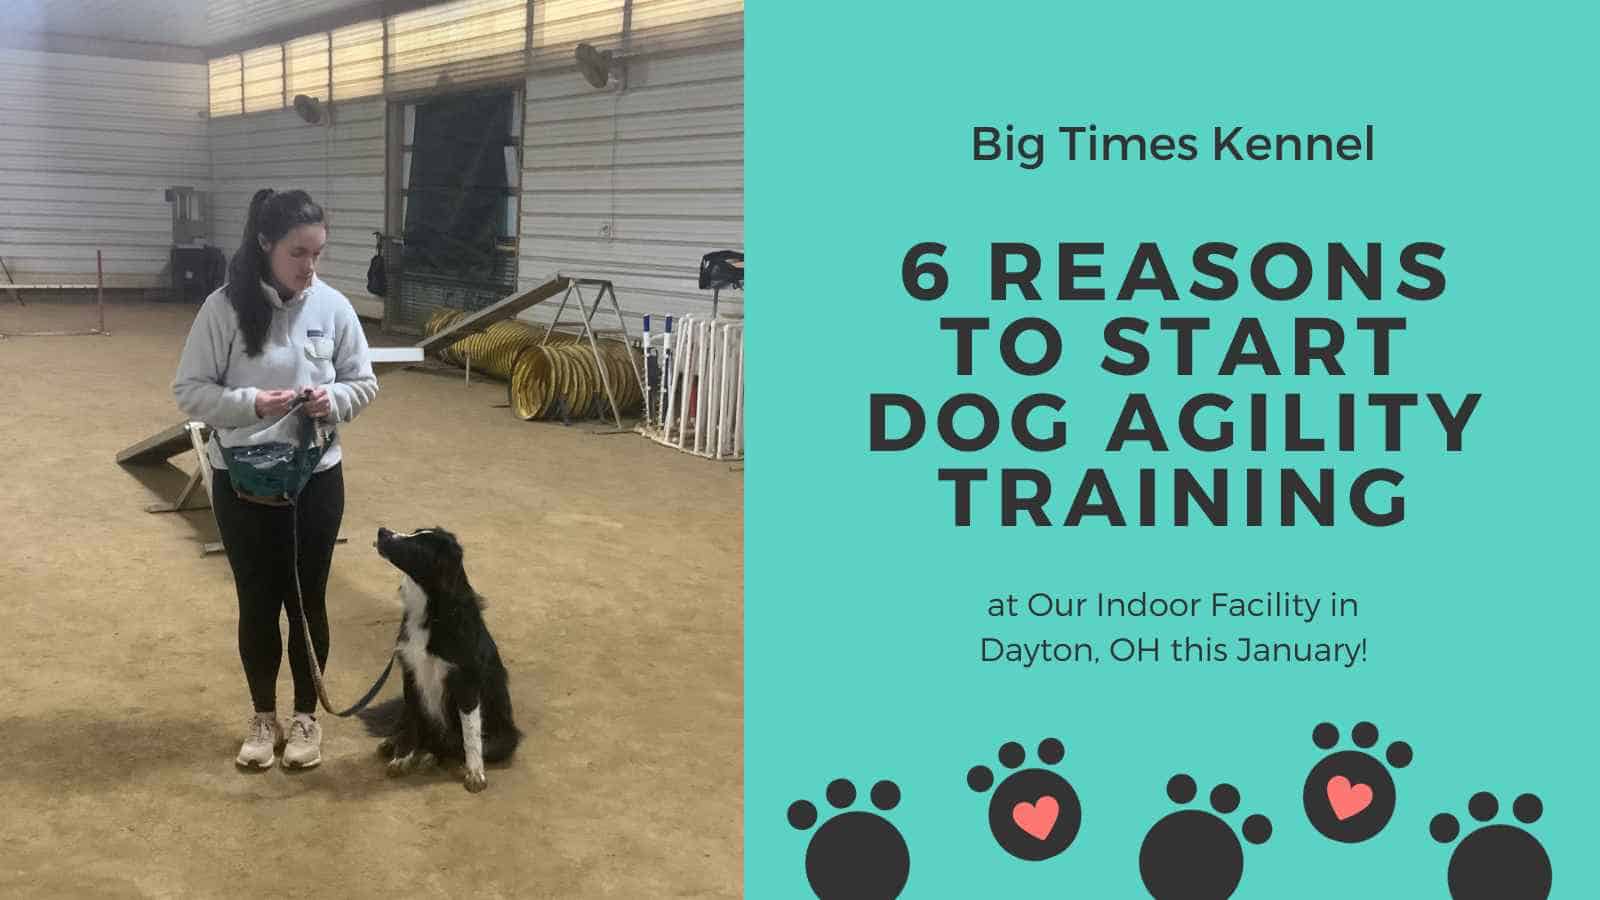 6 Reasons to Start Dog Agility Training at Our Indoor Facility in Dayton, OH this January